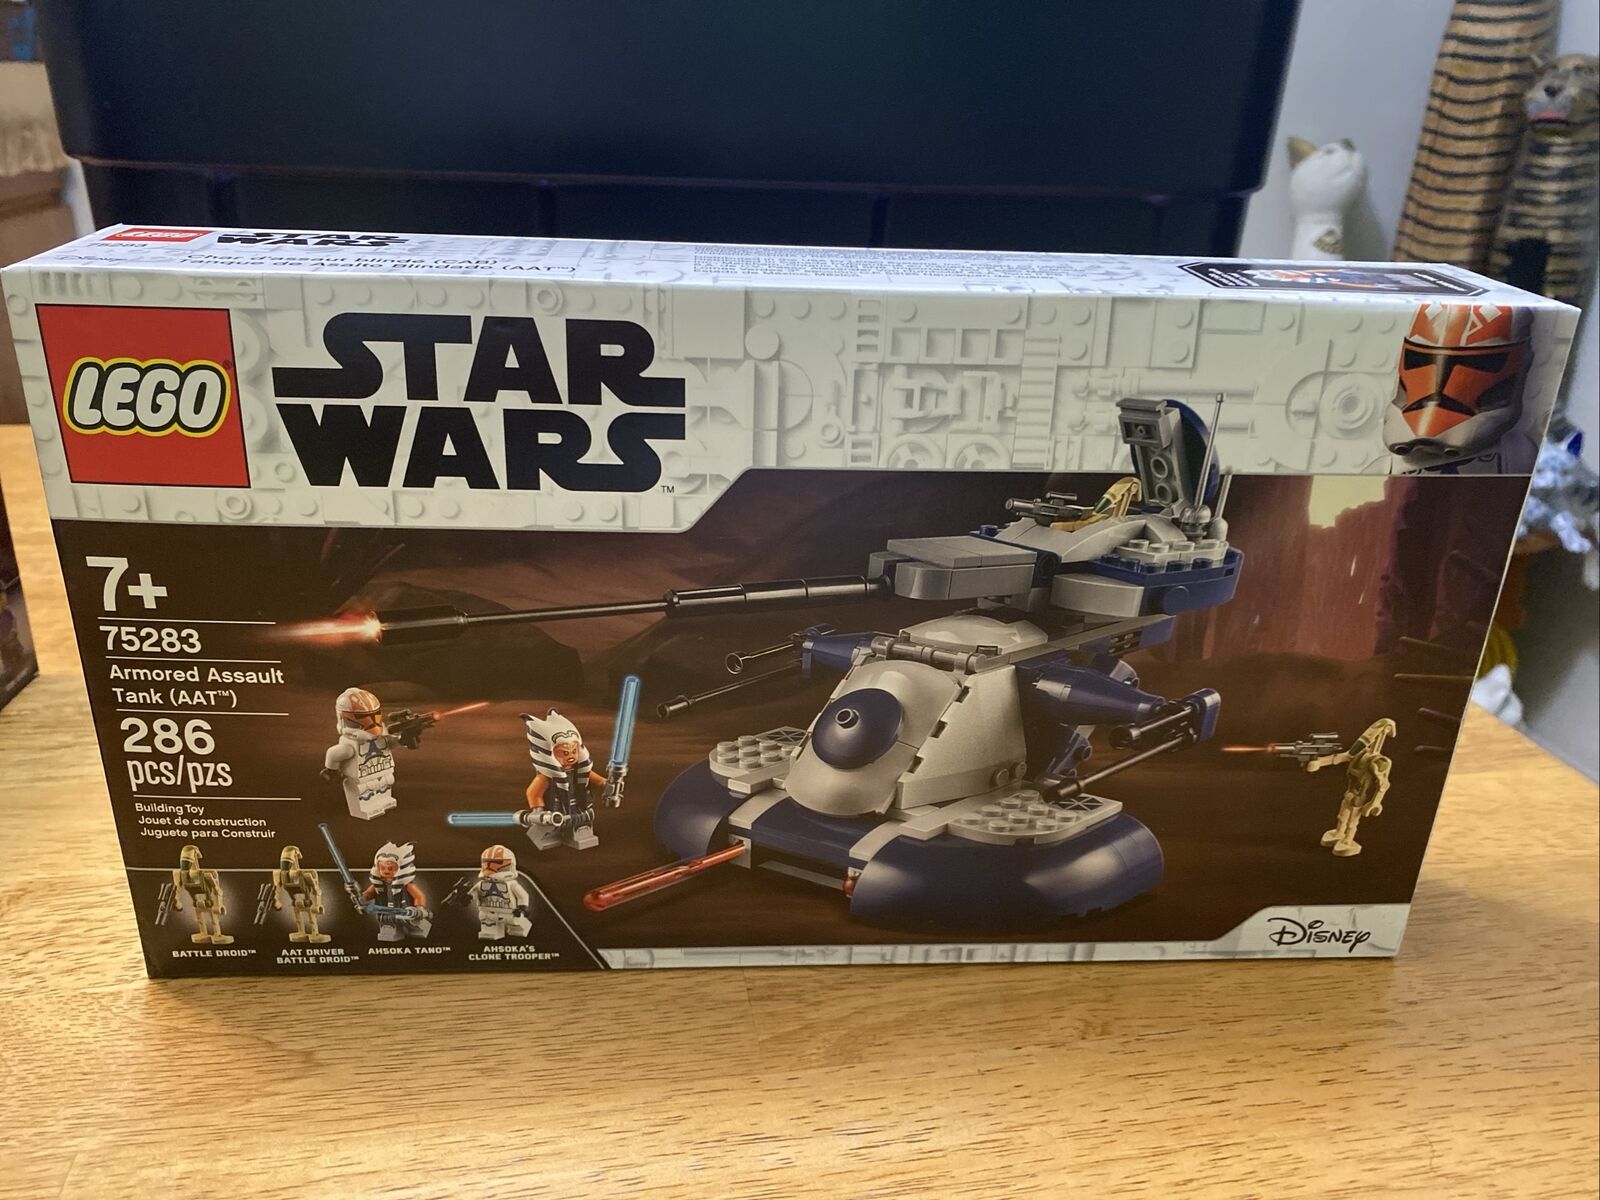 LEGO 75283 AAT Armored Assault Tank Retired Star Wars New Sealed The Clone Wars